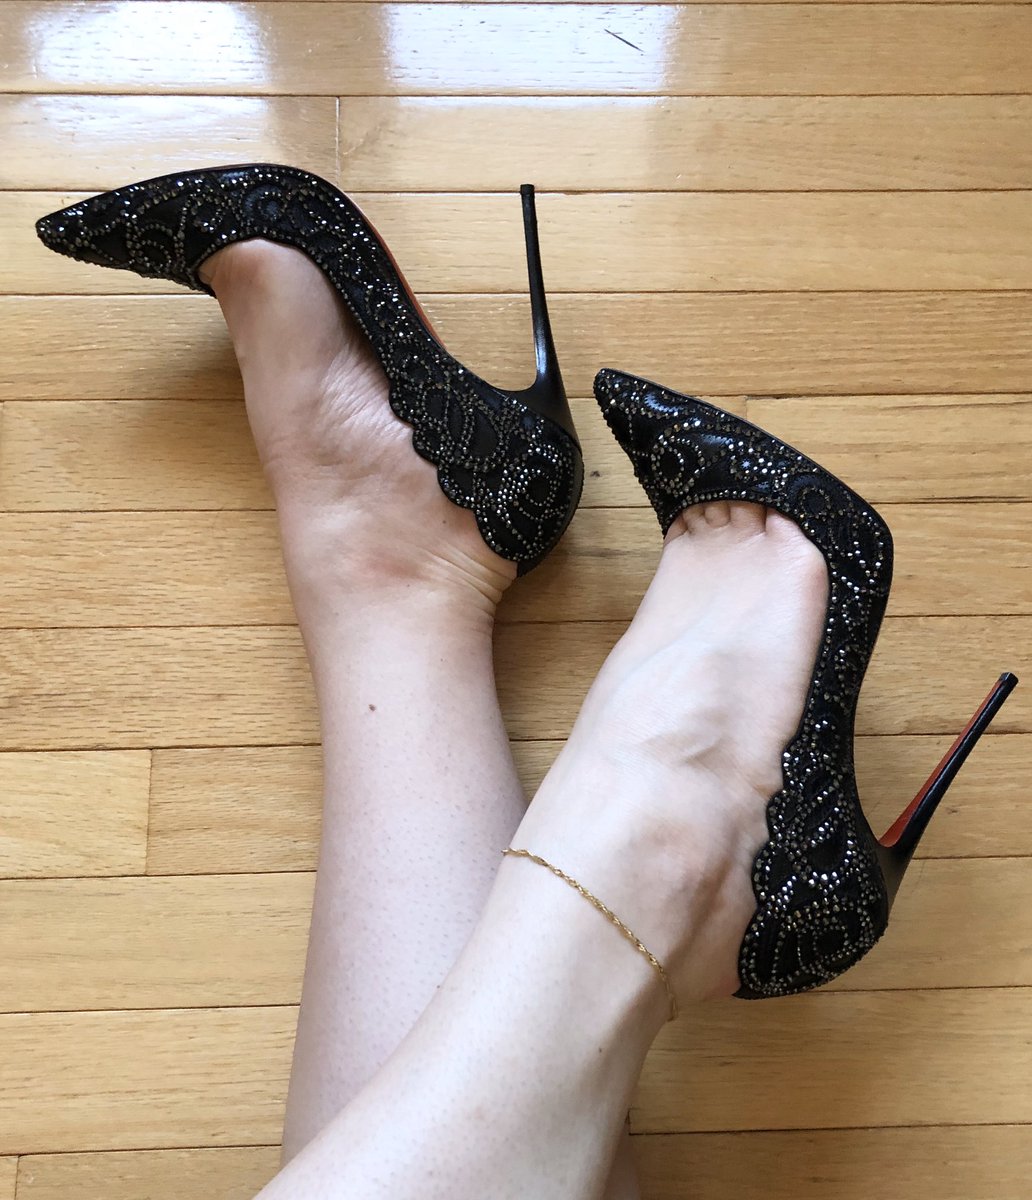 Good morning!Today I’m wearing my fanciest heels as motivation to get through my 4th consecutive Monday in lockdown.